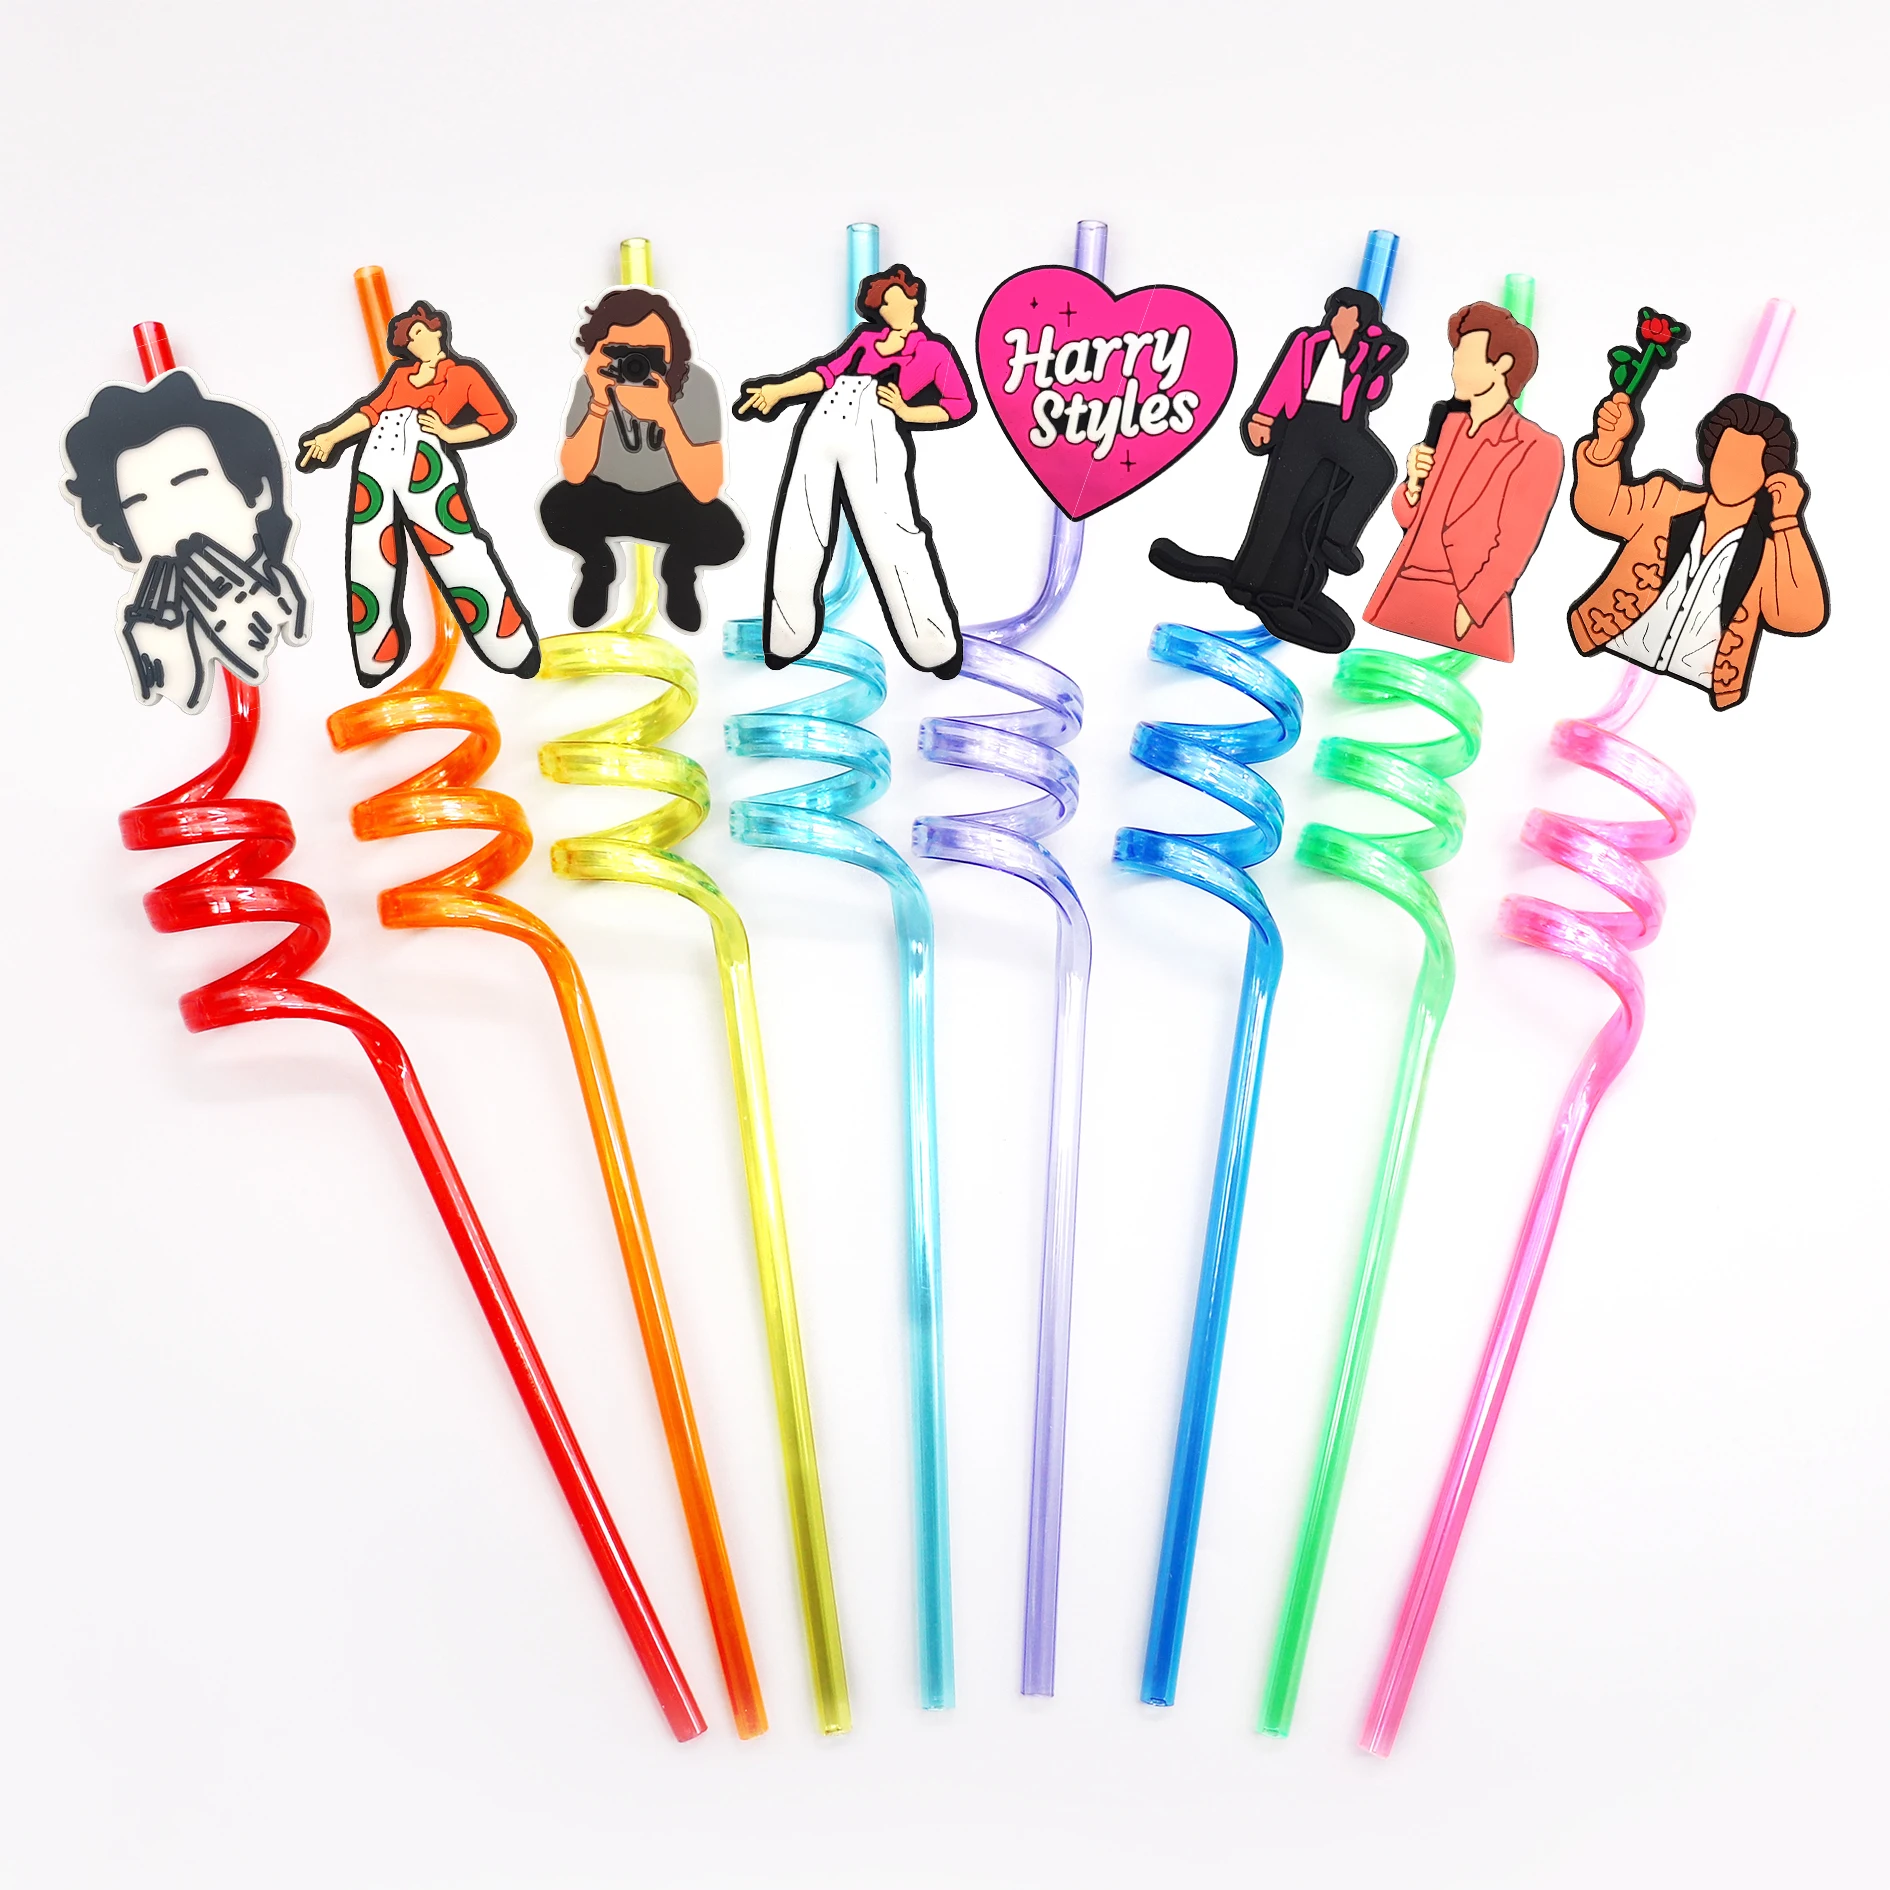 Harry Styles Straw Topper Charms New Arrival Croc Charms Straw Topper Charms For Bar Accessories